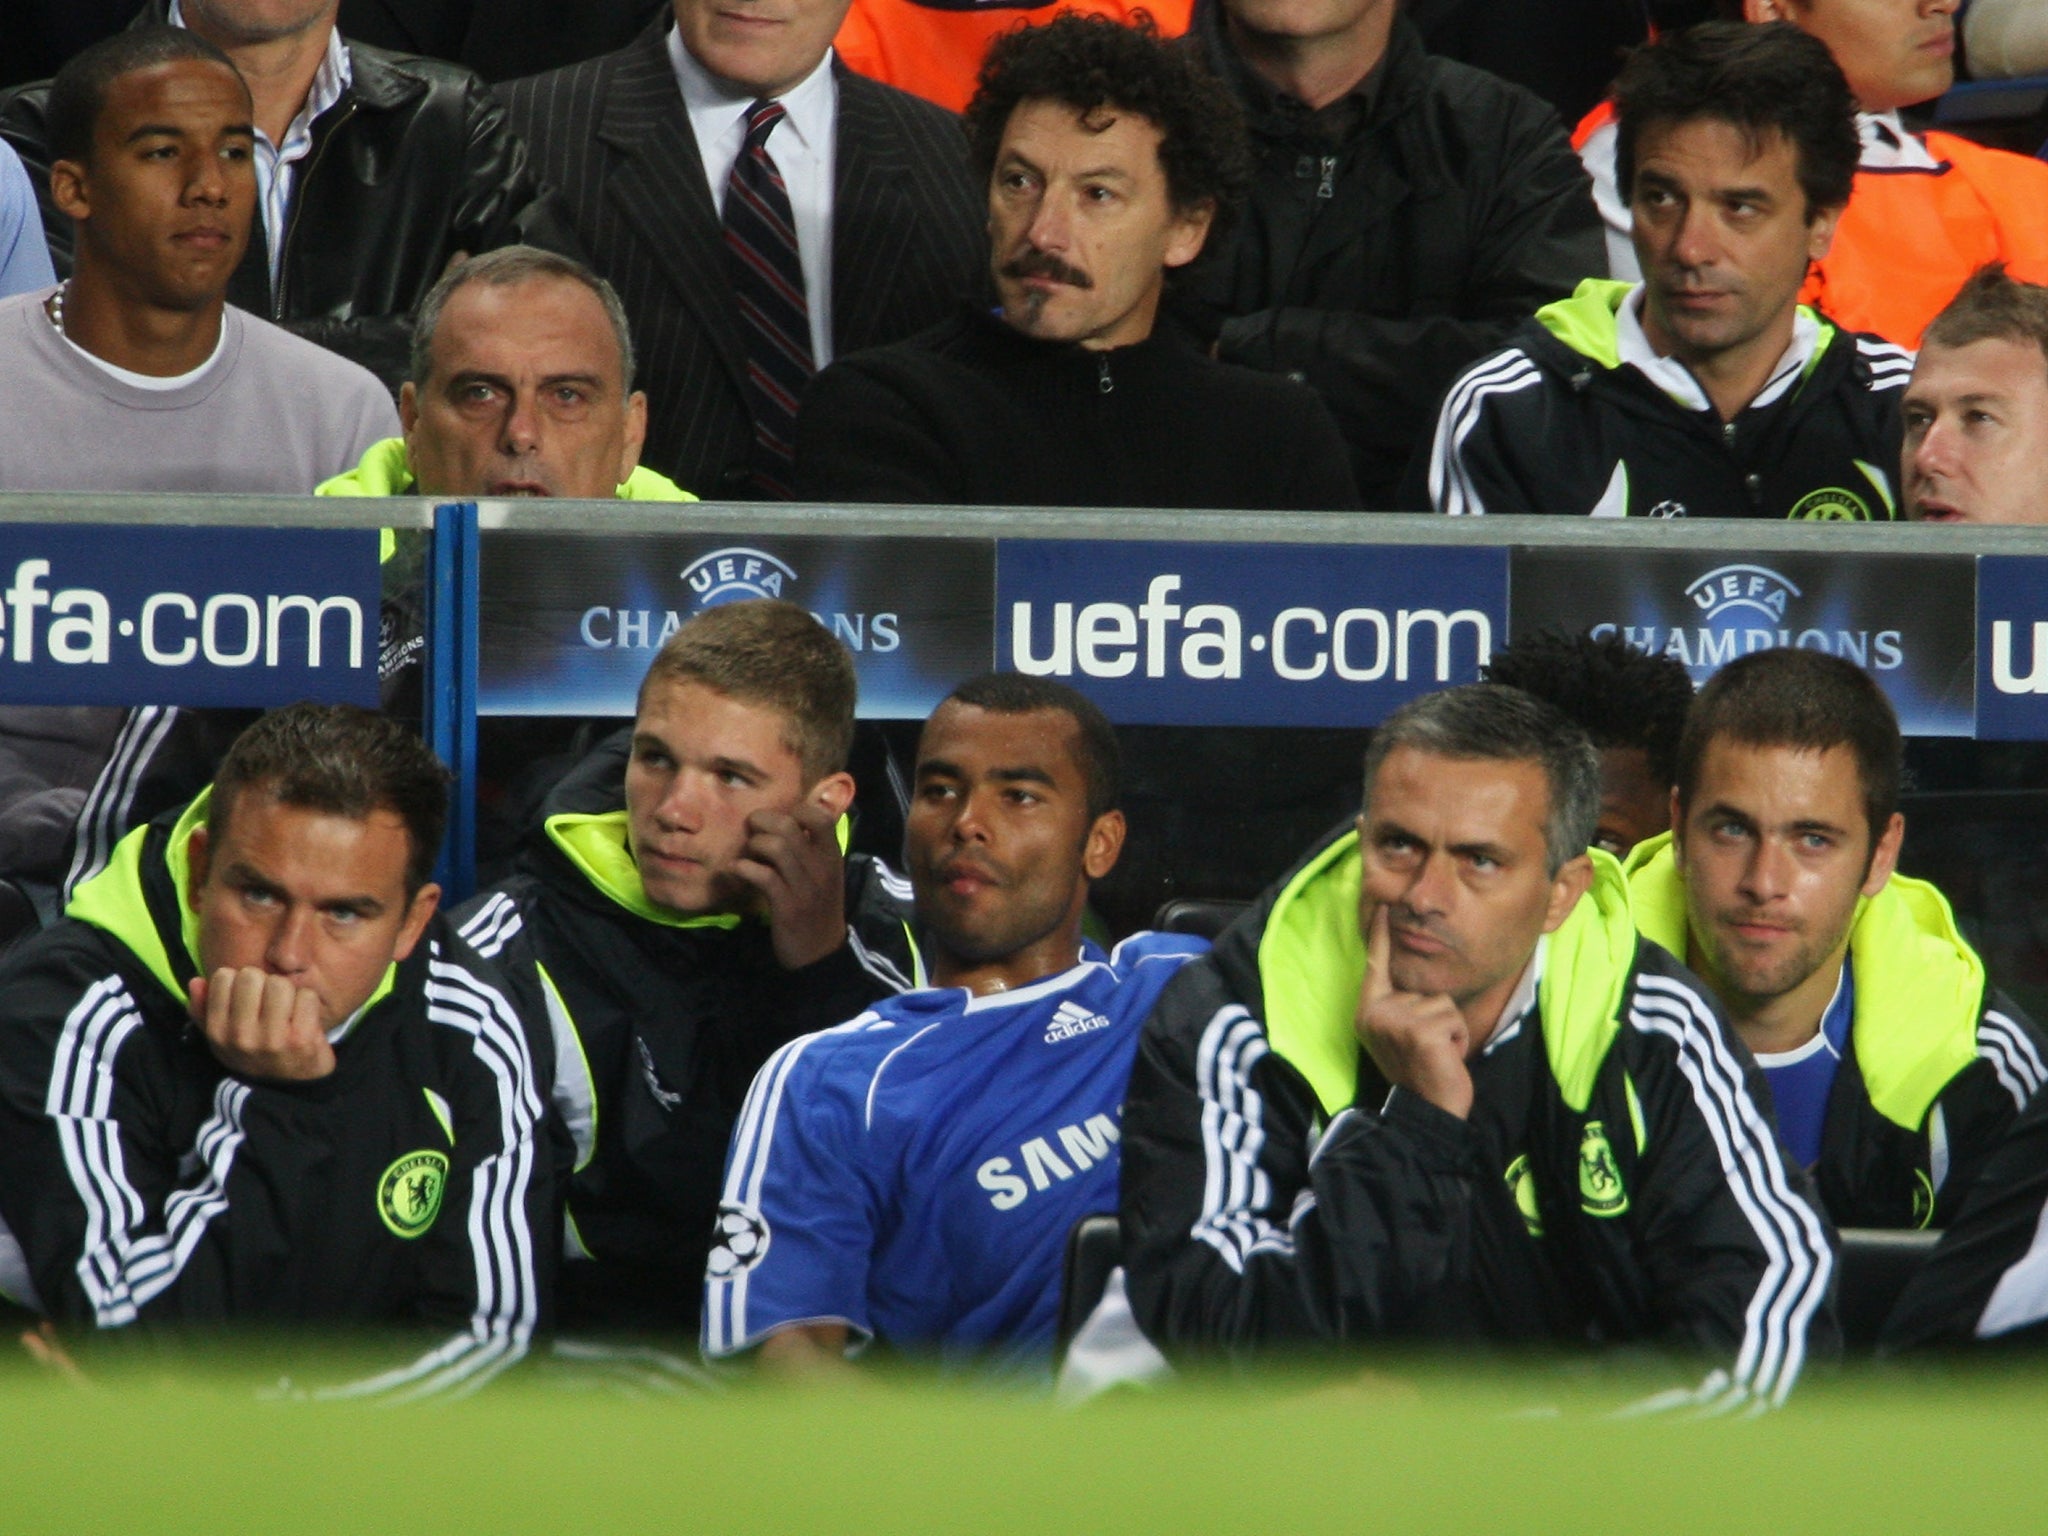 Mourinho was sacked just days after a shock 1-1 draw with Rosenborg in September 2007